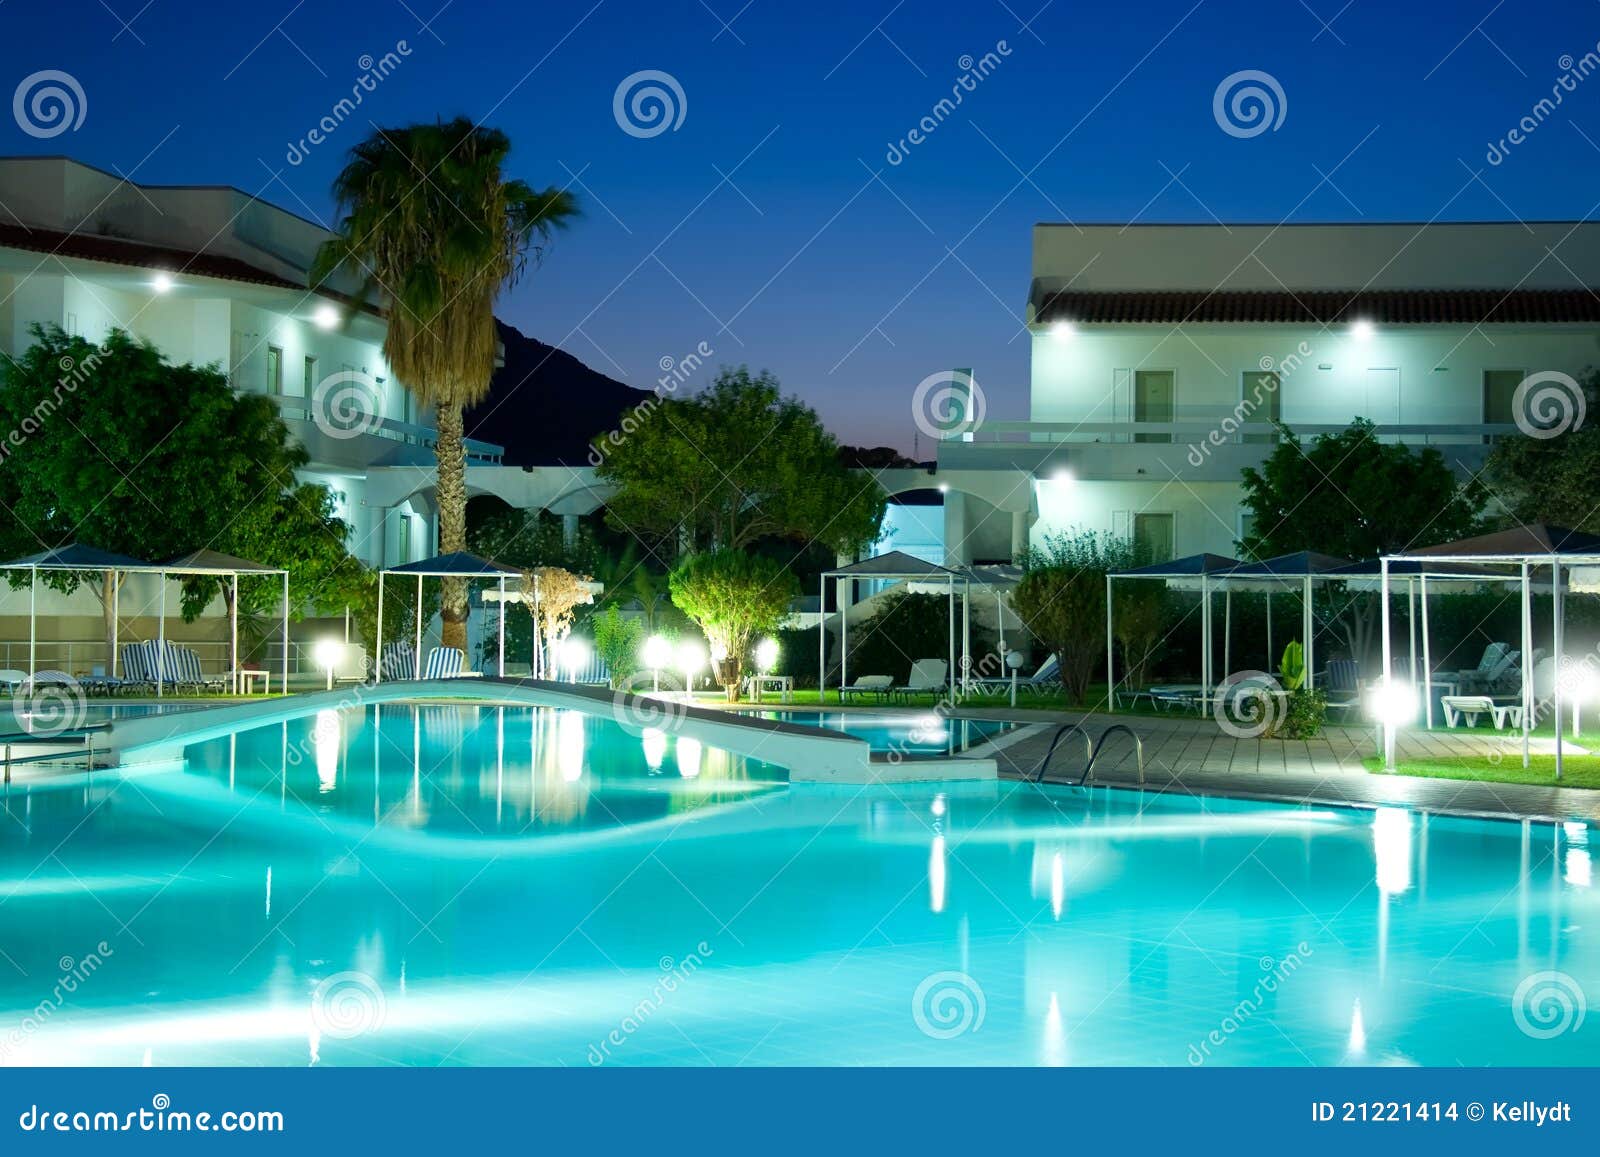 Hotel swimming pool stock photo. Image of outside, outdoor - 21221414